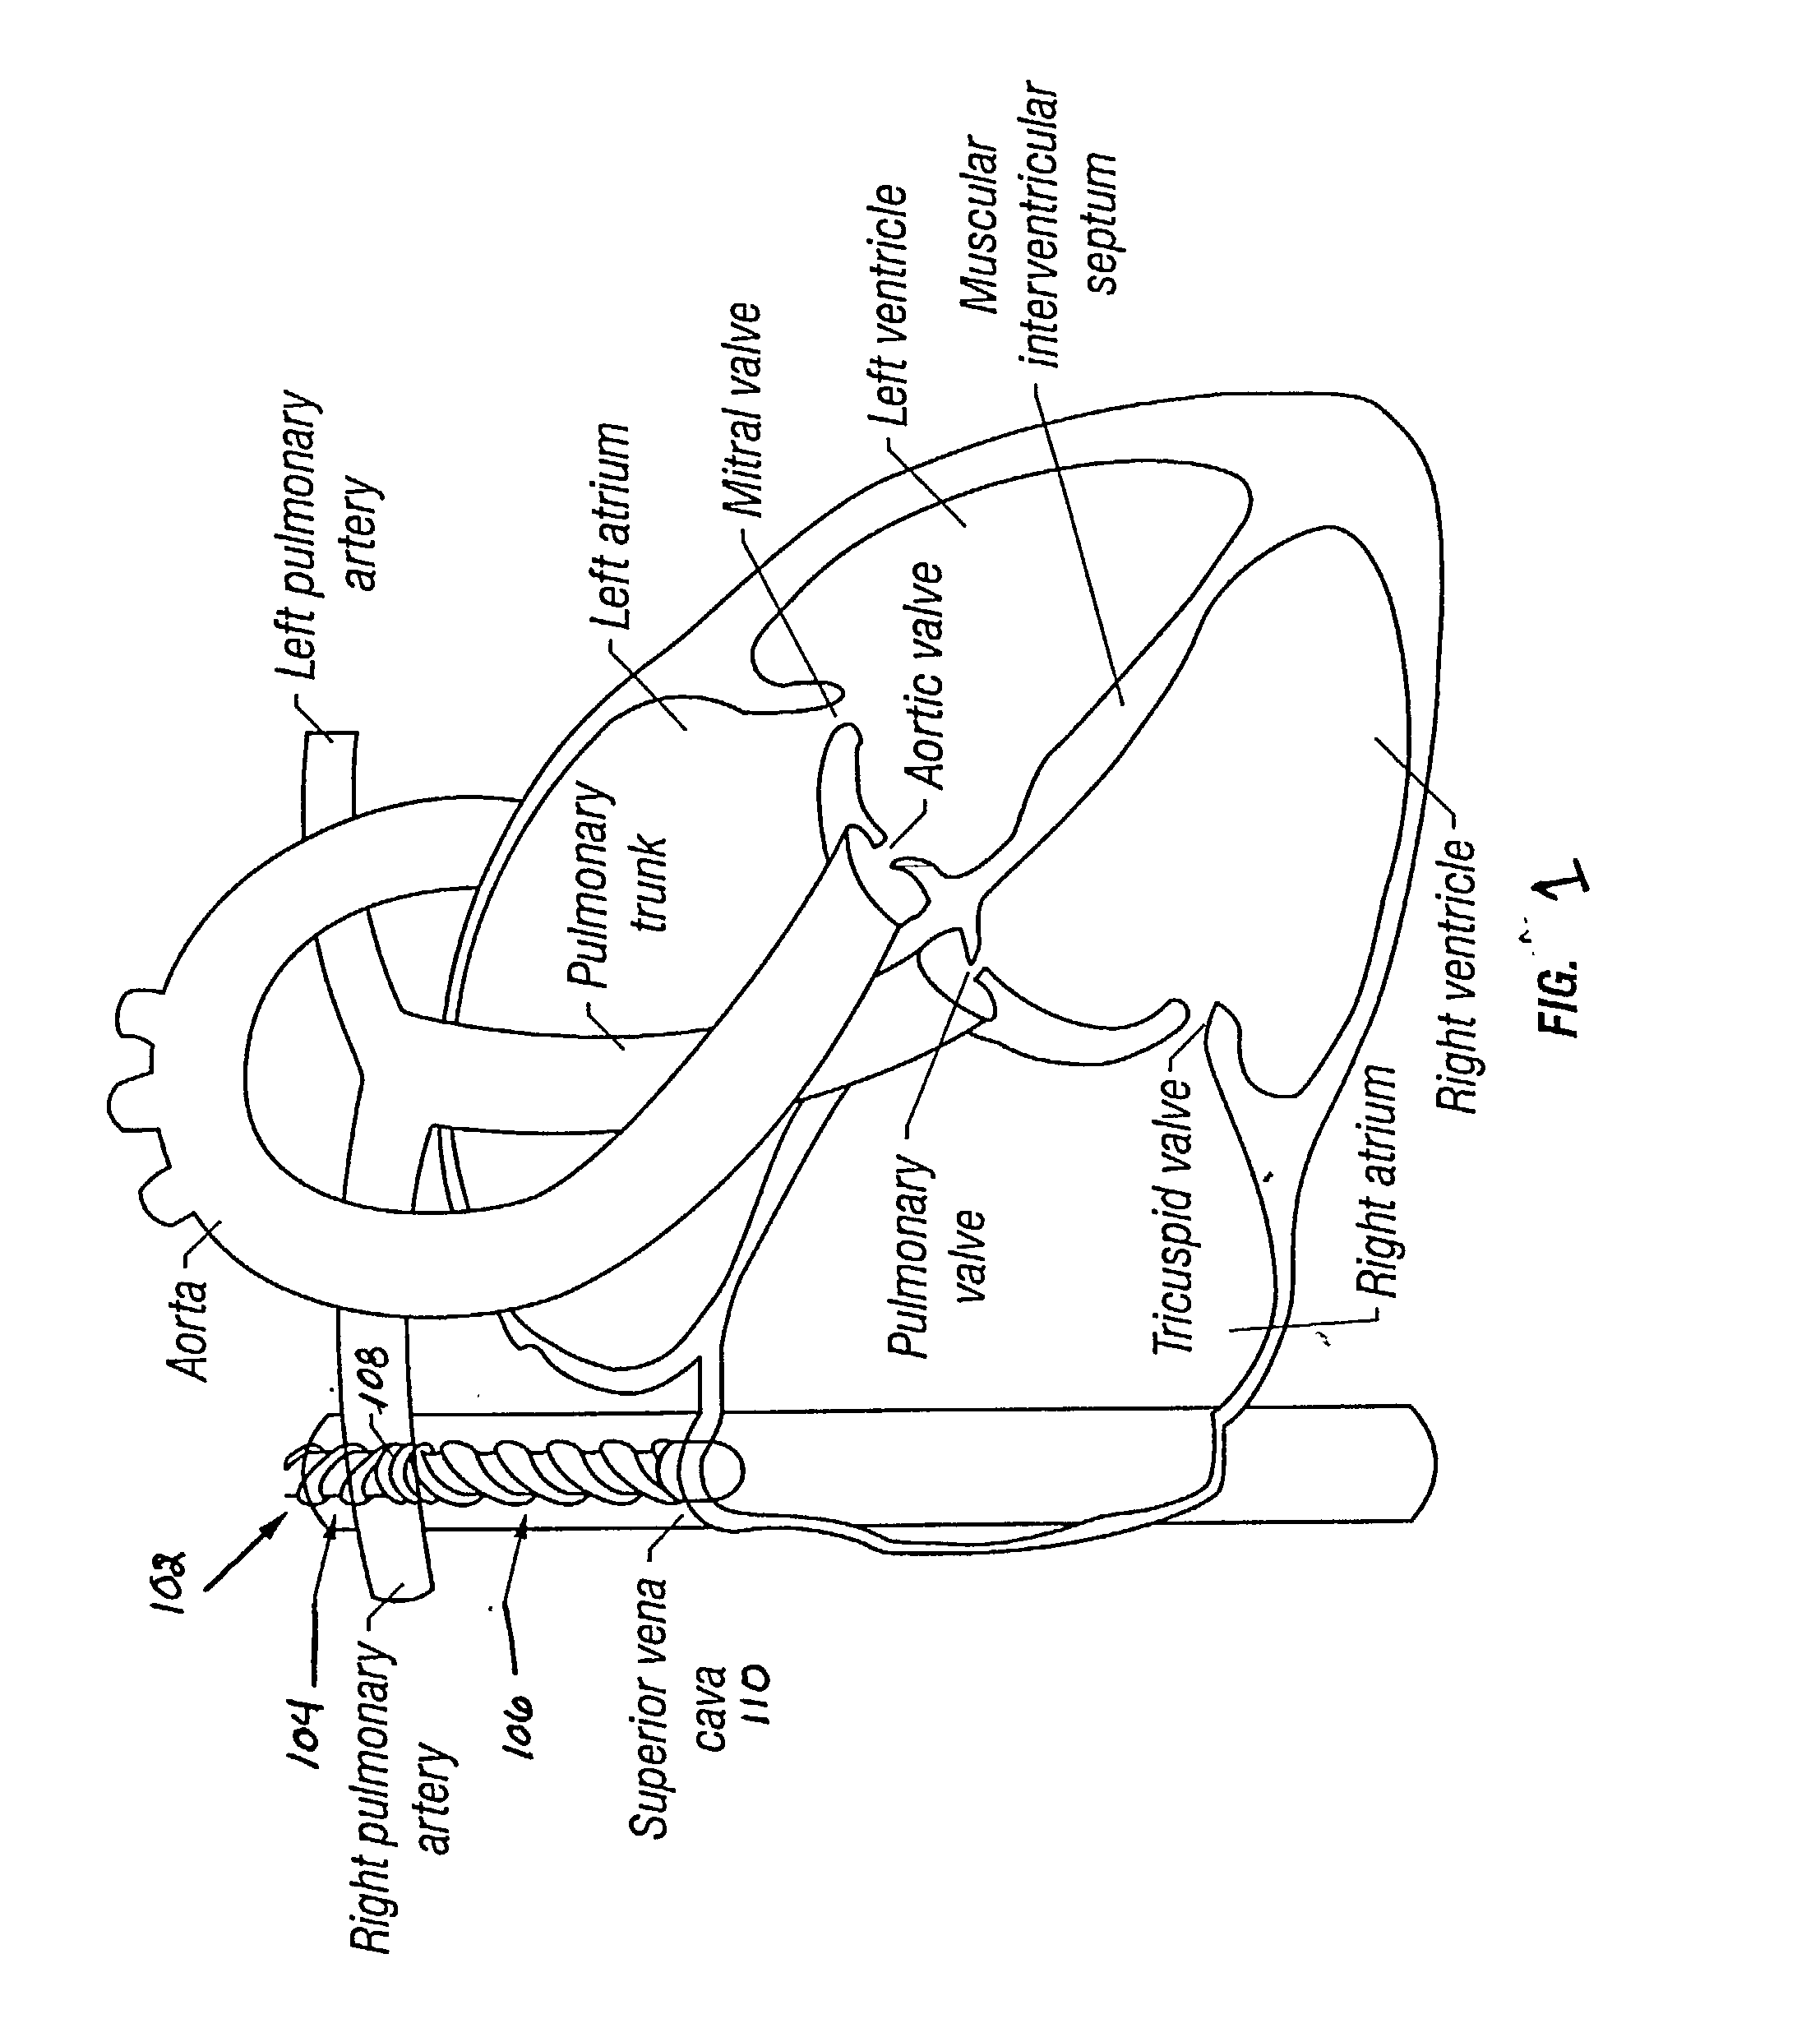 System and method for patient temperature control employing temperature projection algorithm